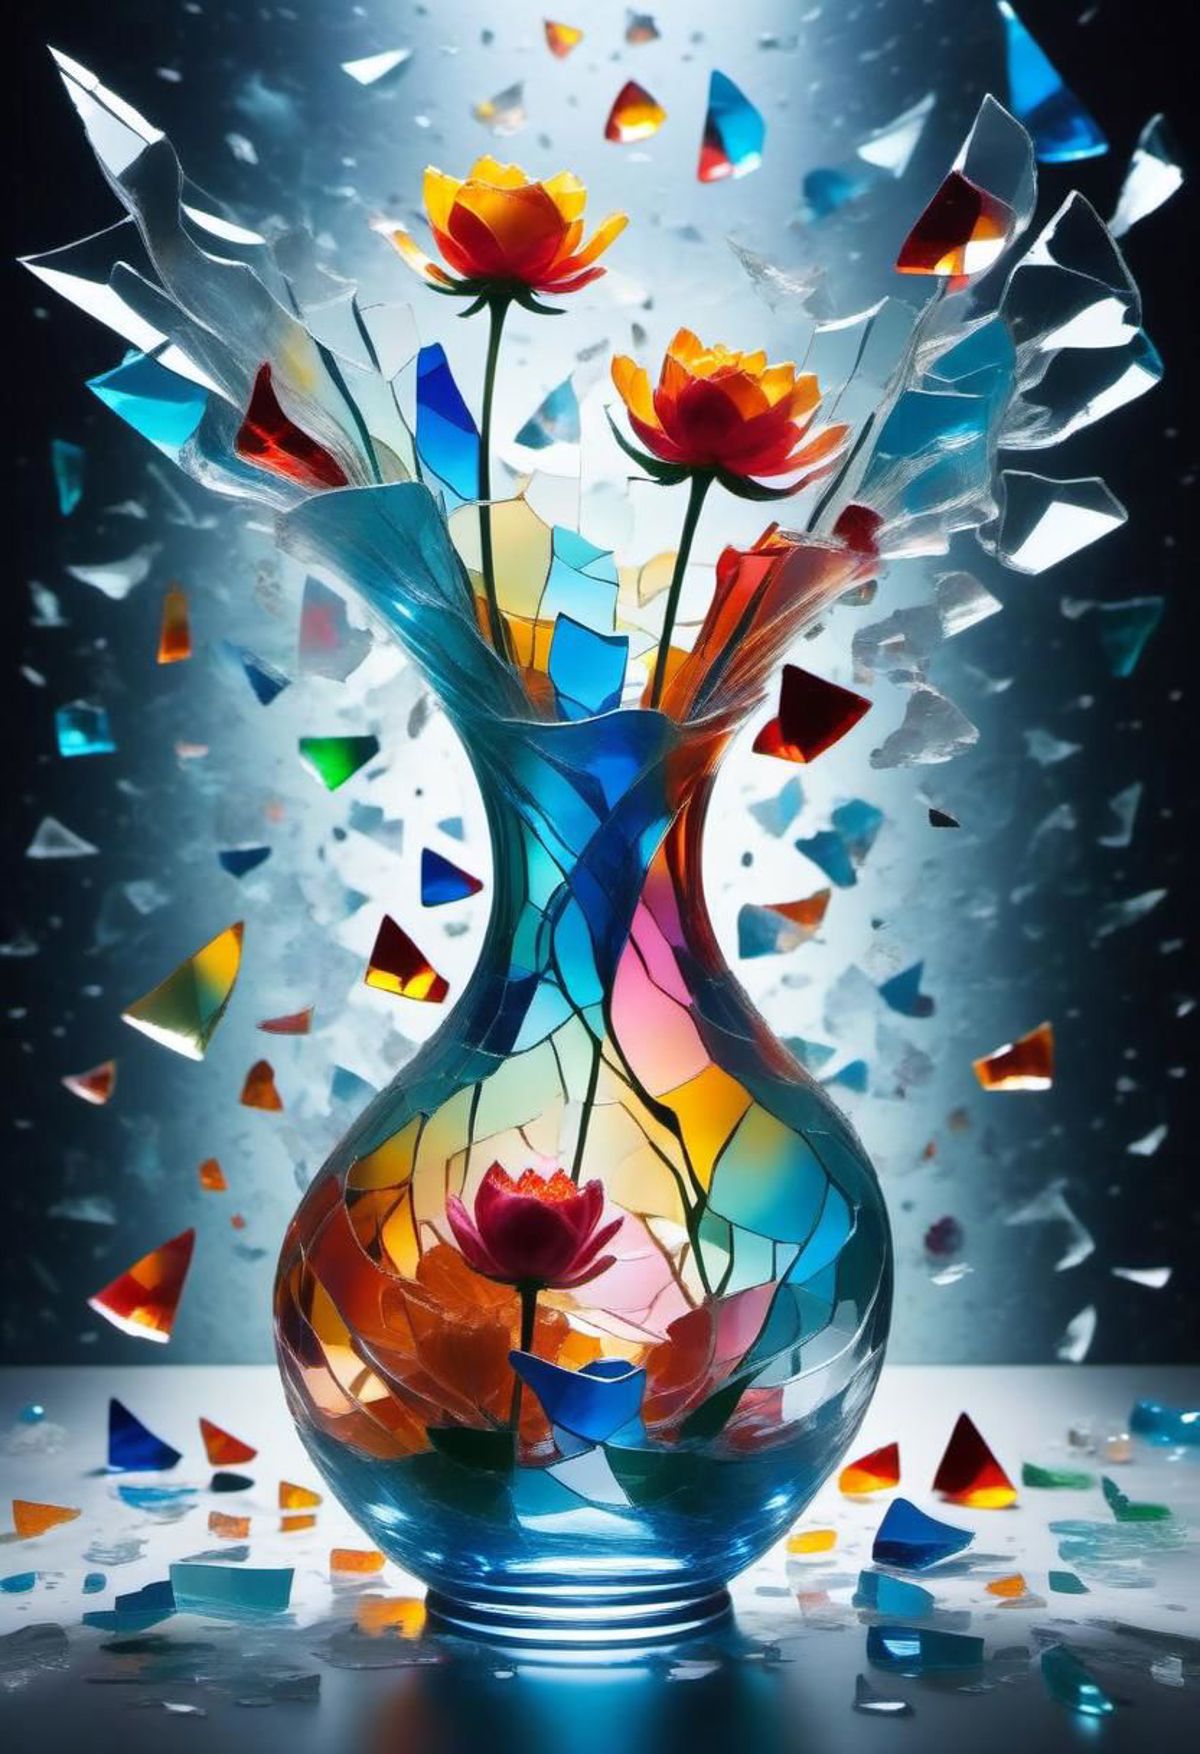 A vase with flowers and shattered glass, creating a stunning artistic display.